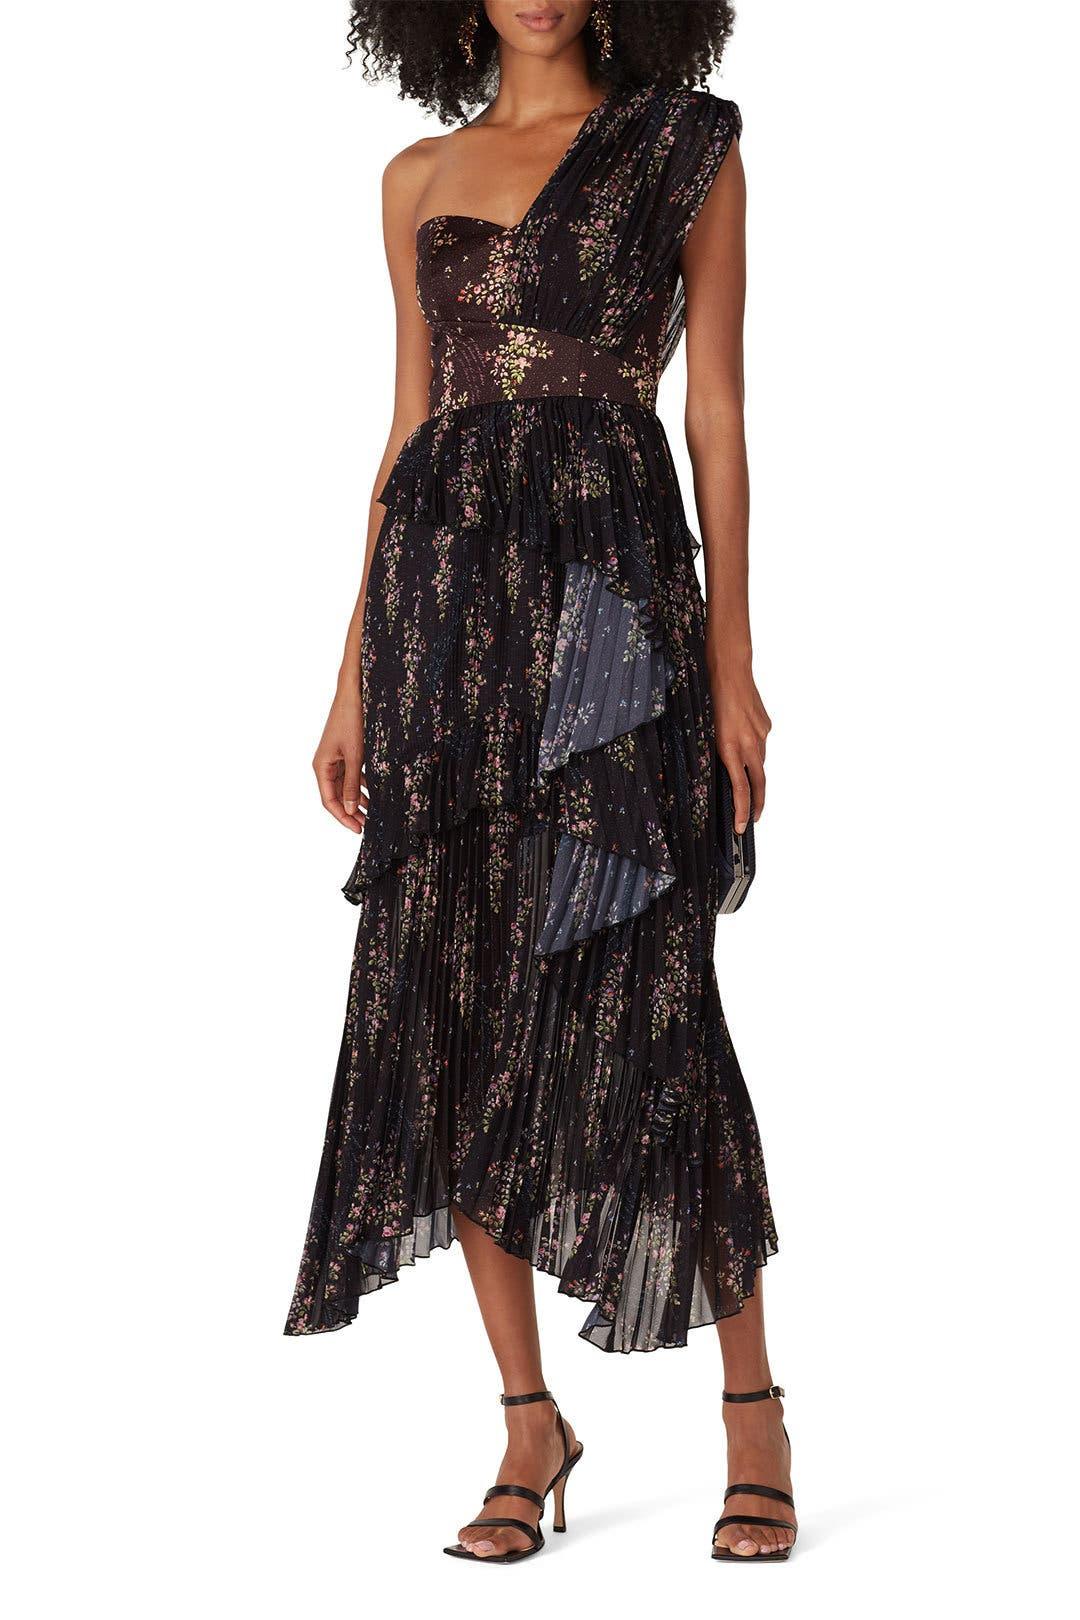 Wedding Guest Dresses: Fall/Winter Edition - The Real Tall